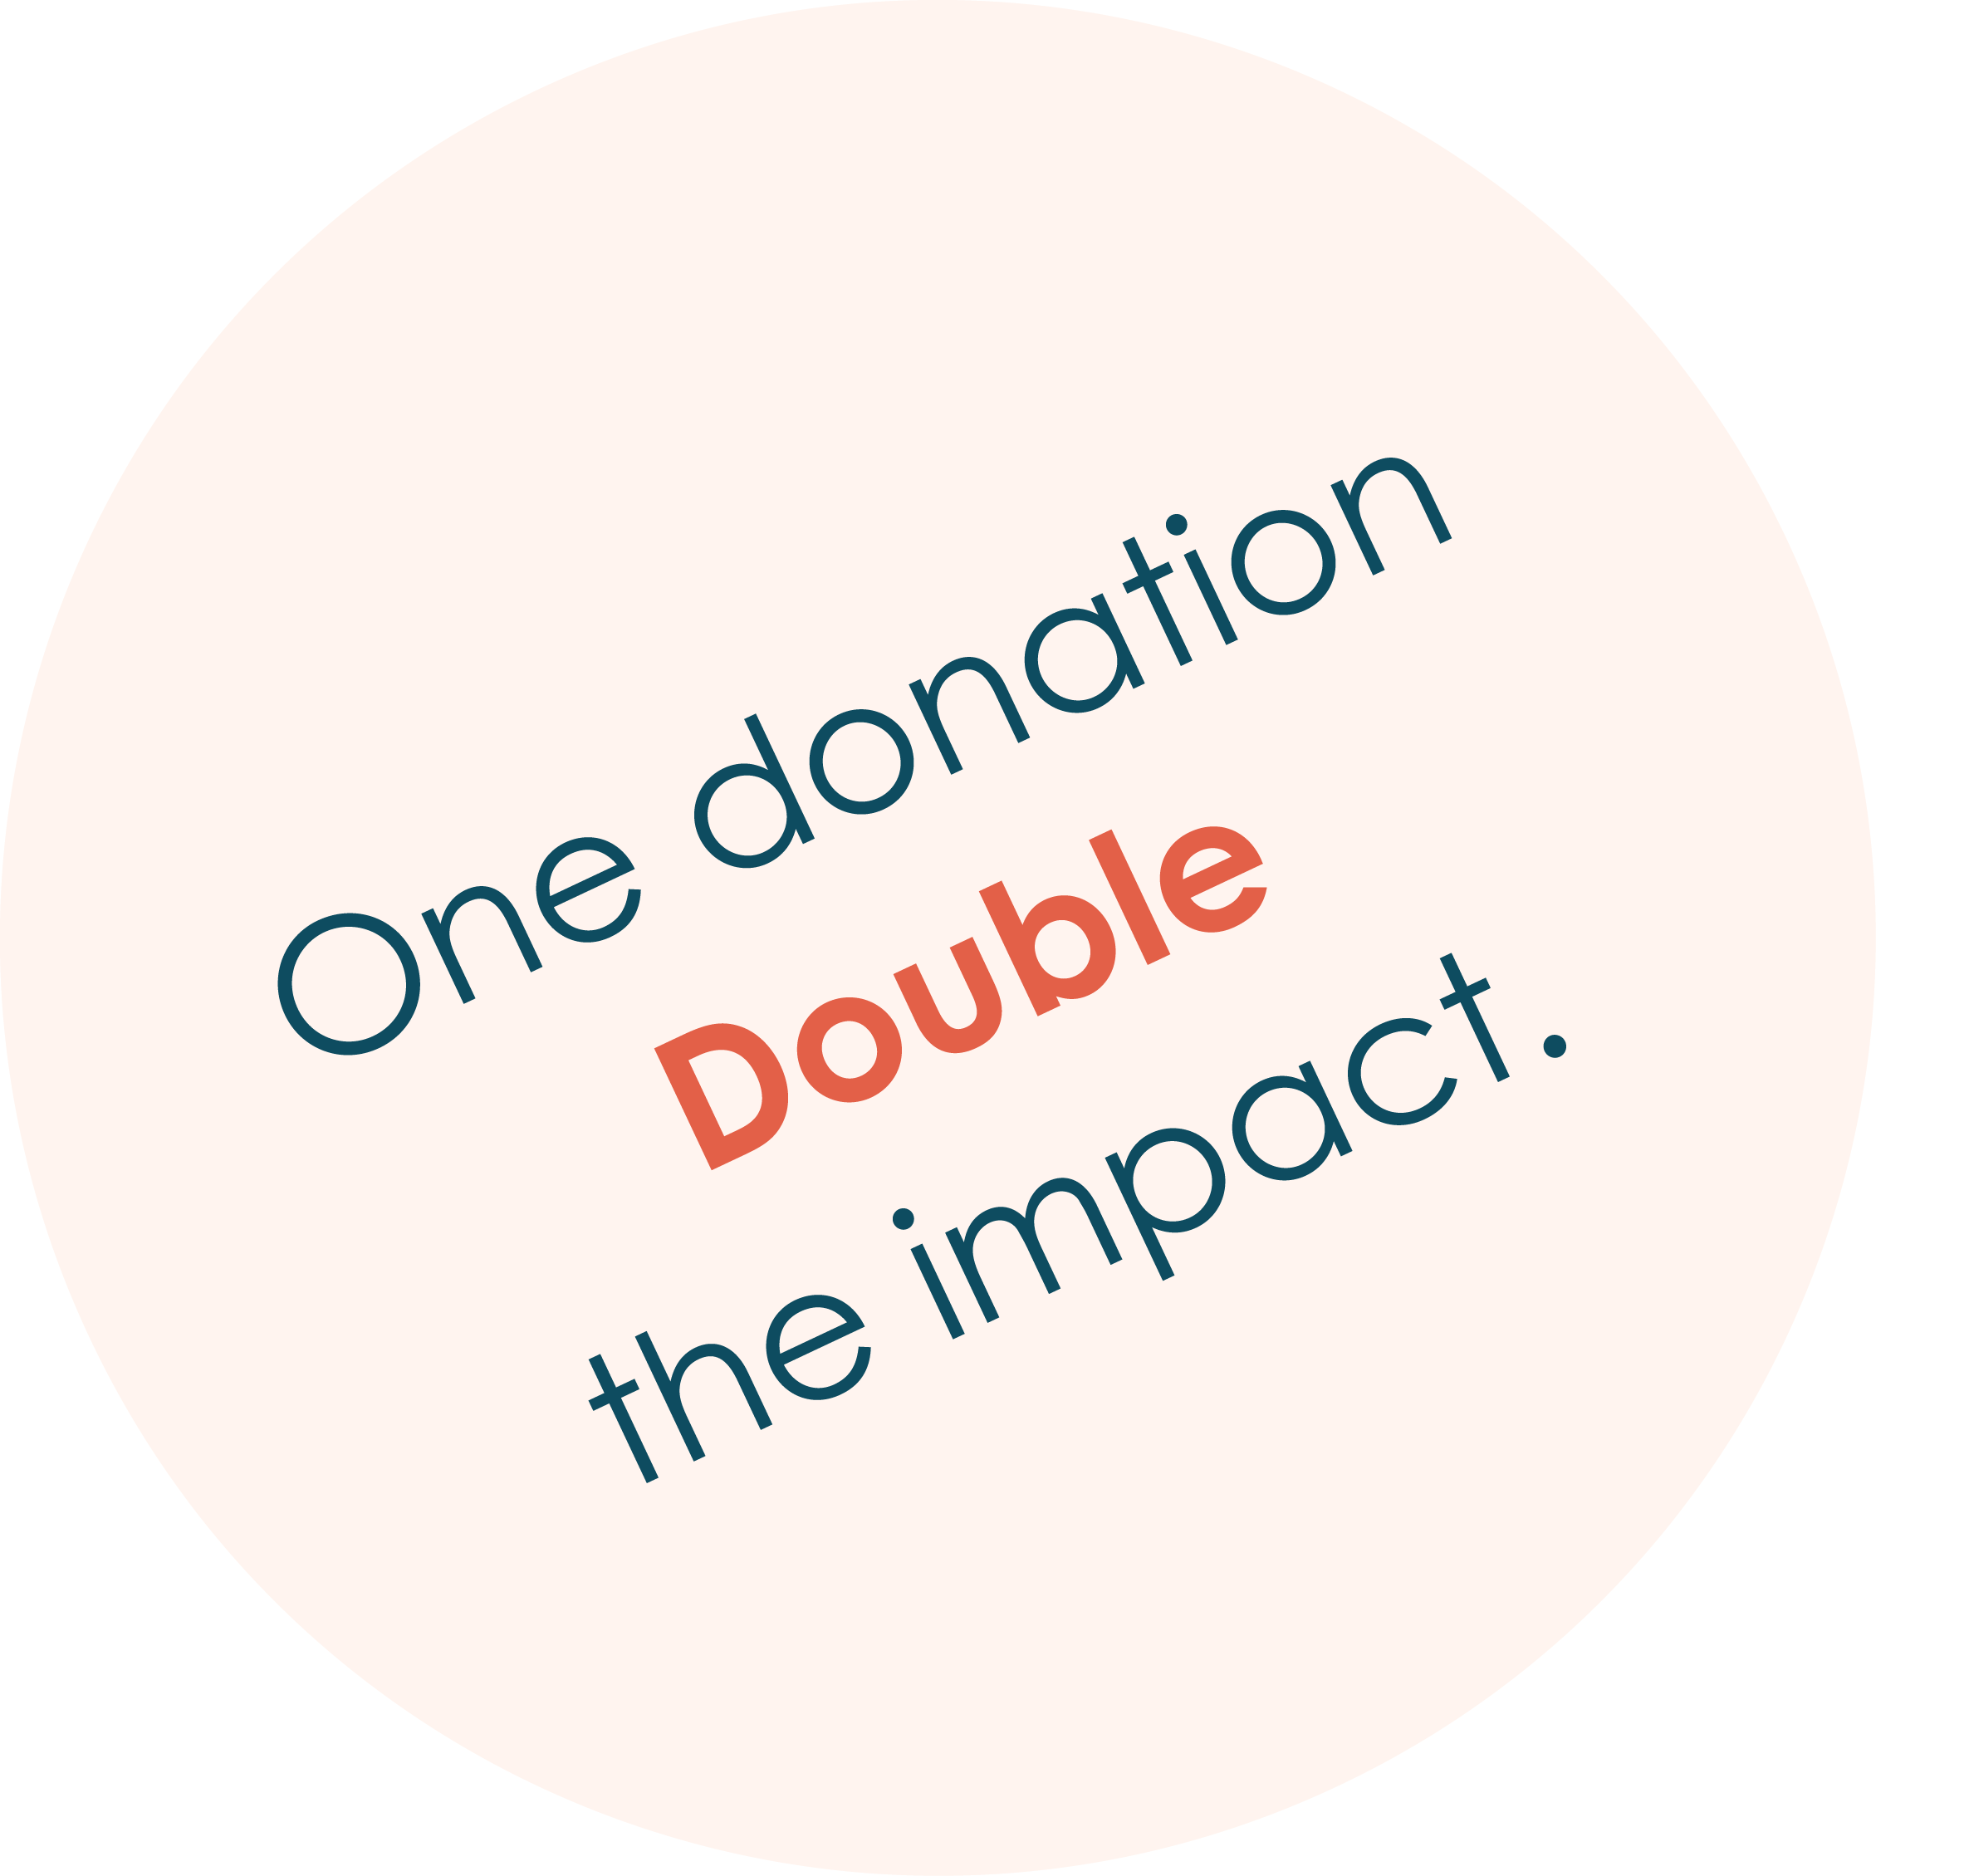 Israel Bonds: One donation double the impact